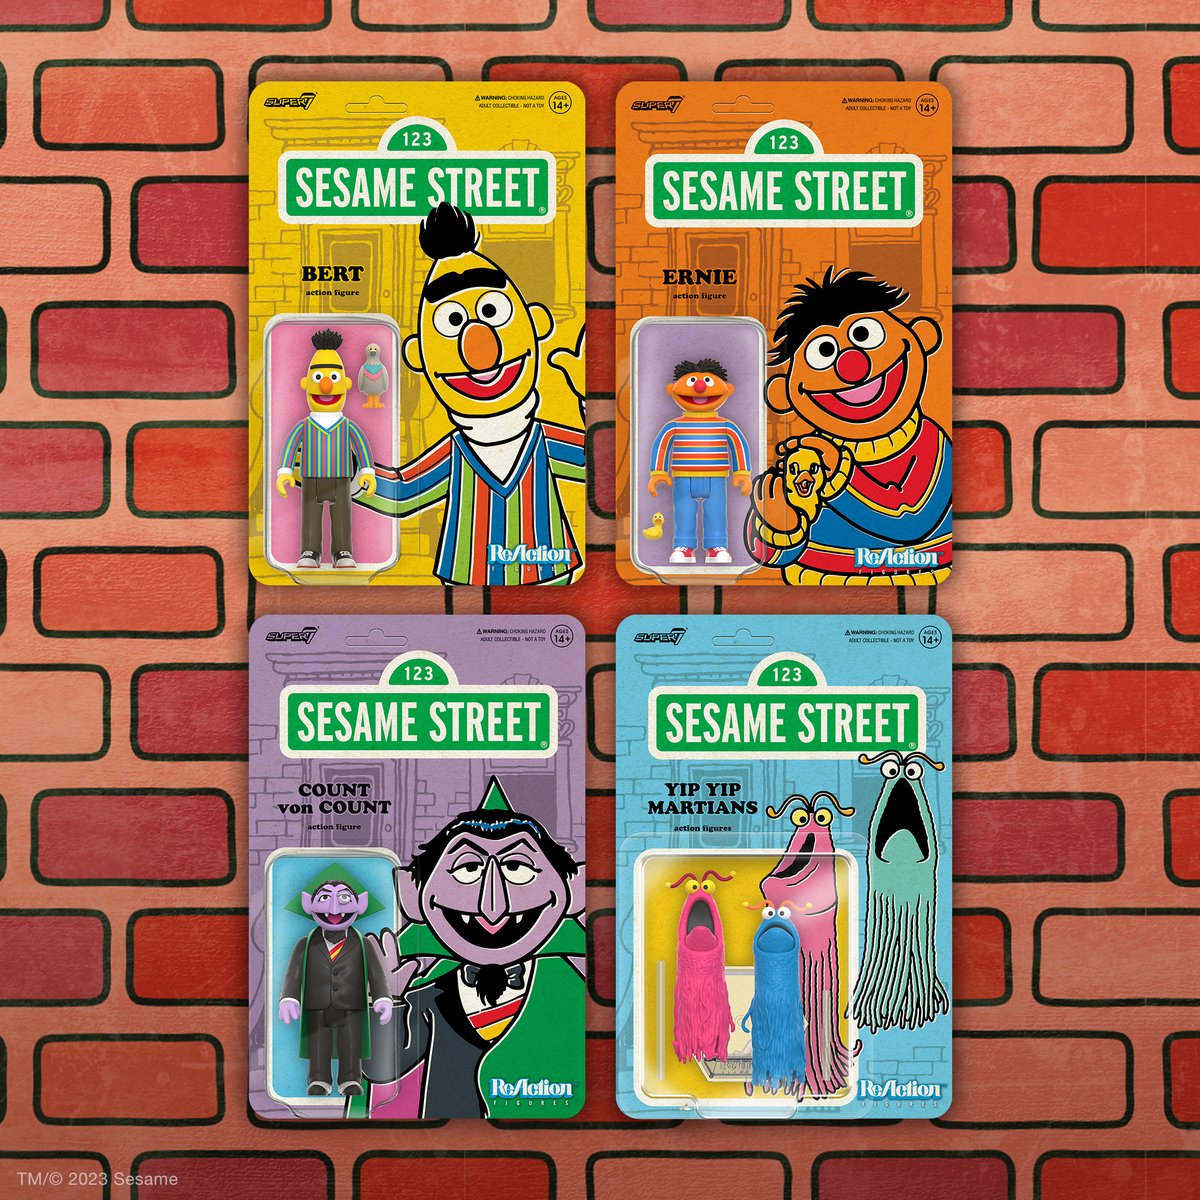 🎉 Sesame Street ReAction Figures Wave 1 Giveaway! How to Enter: 1️⃣ Follow us @super7store 2️⃣ RT & Like this post! 3️⃣ Comment on the post with the Sesame Street character you'd like to see as ReAction next! #Super7 #Super7giveaway #giveaway